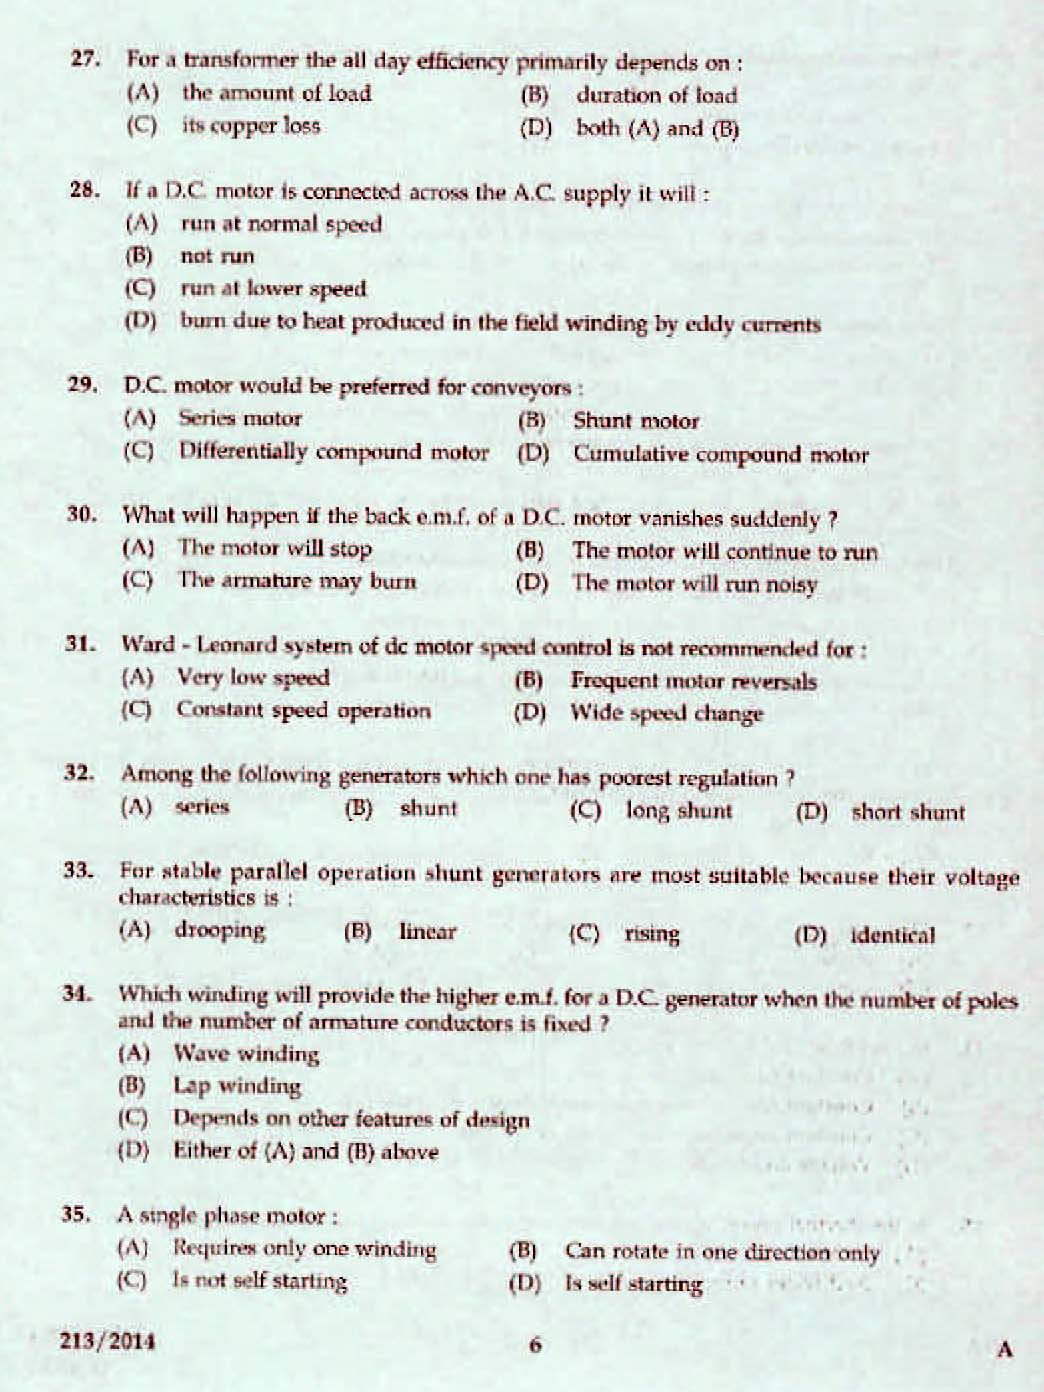 Kerala PSC Assistant Engineer Electrical Exam 2014 Question Paper Code 2132014 4